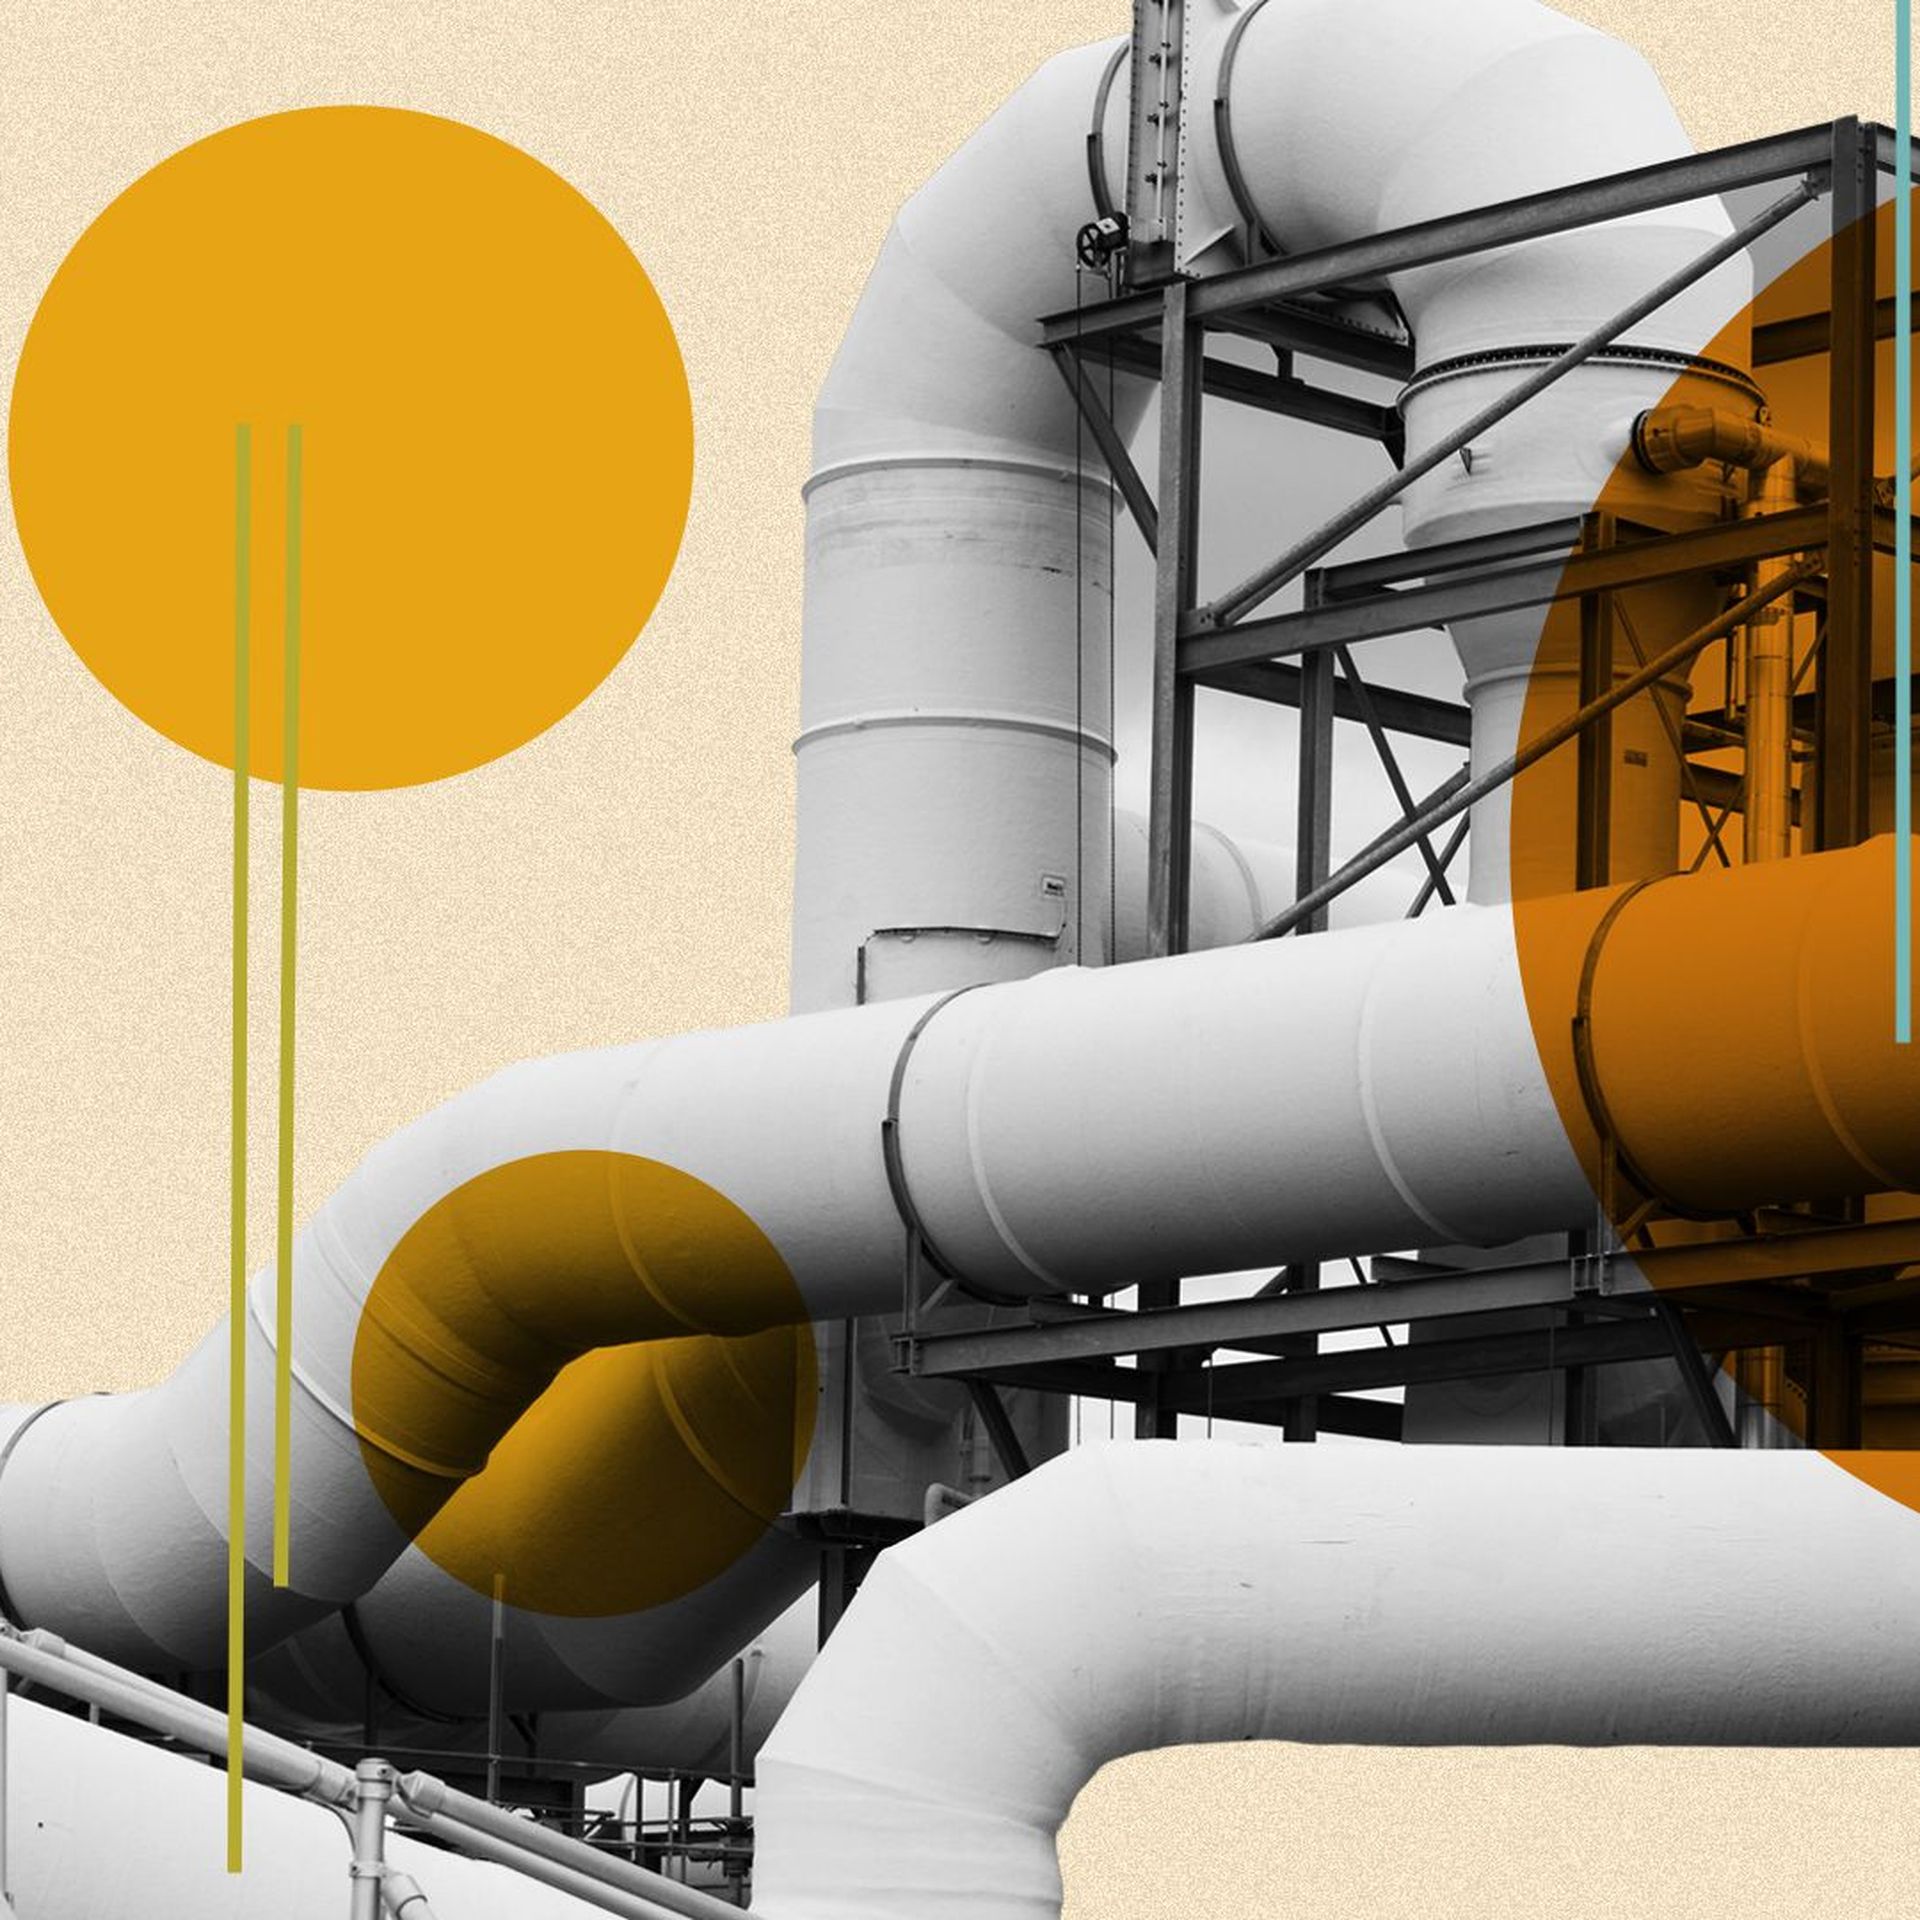 Photo illustration of a pipeline with abstract shapes.